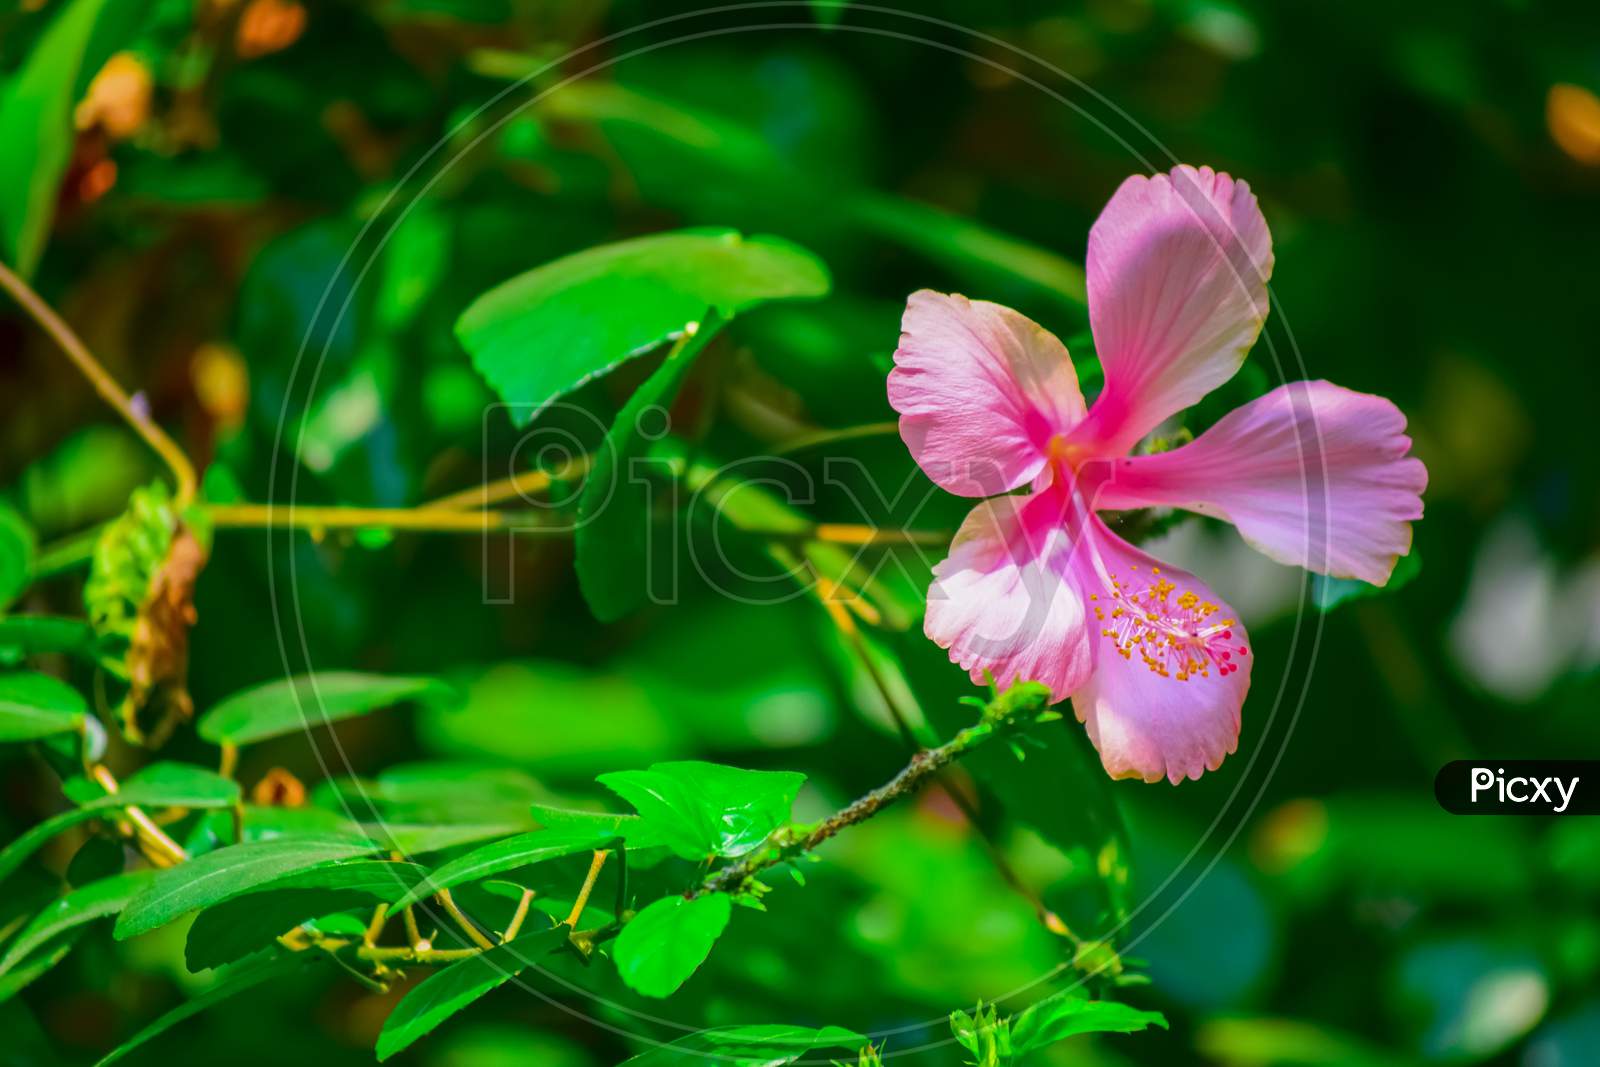 An Isolated Pink China Rose Or Hibiscus With Green Background